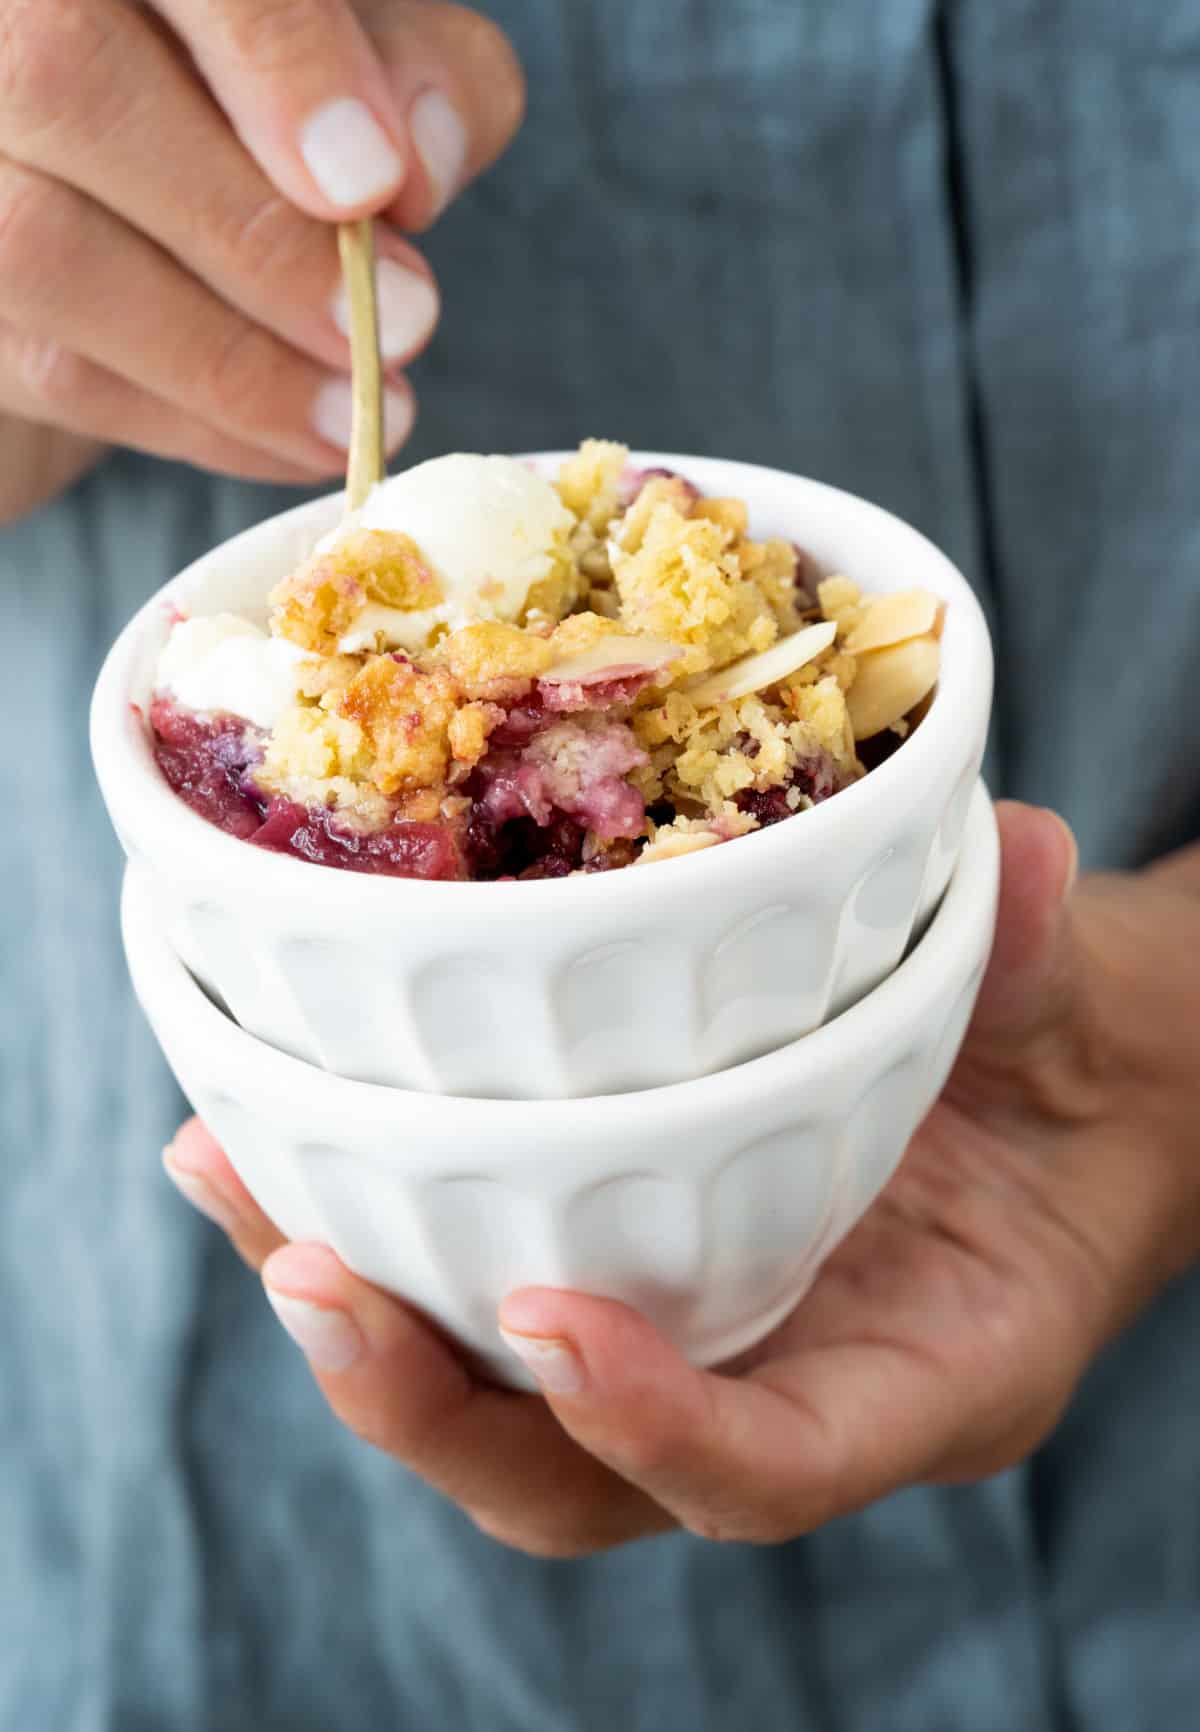 Two white bowls stacked with a serving of apple berry crumble. Hand holding a spoon inside.